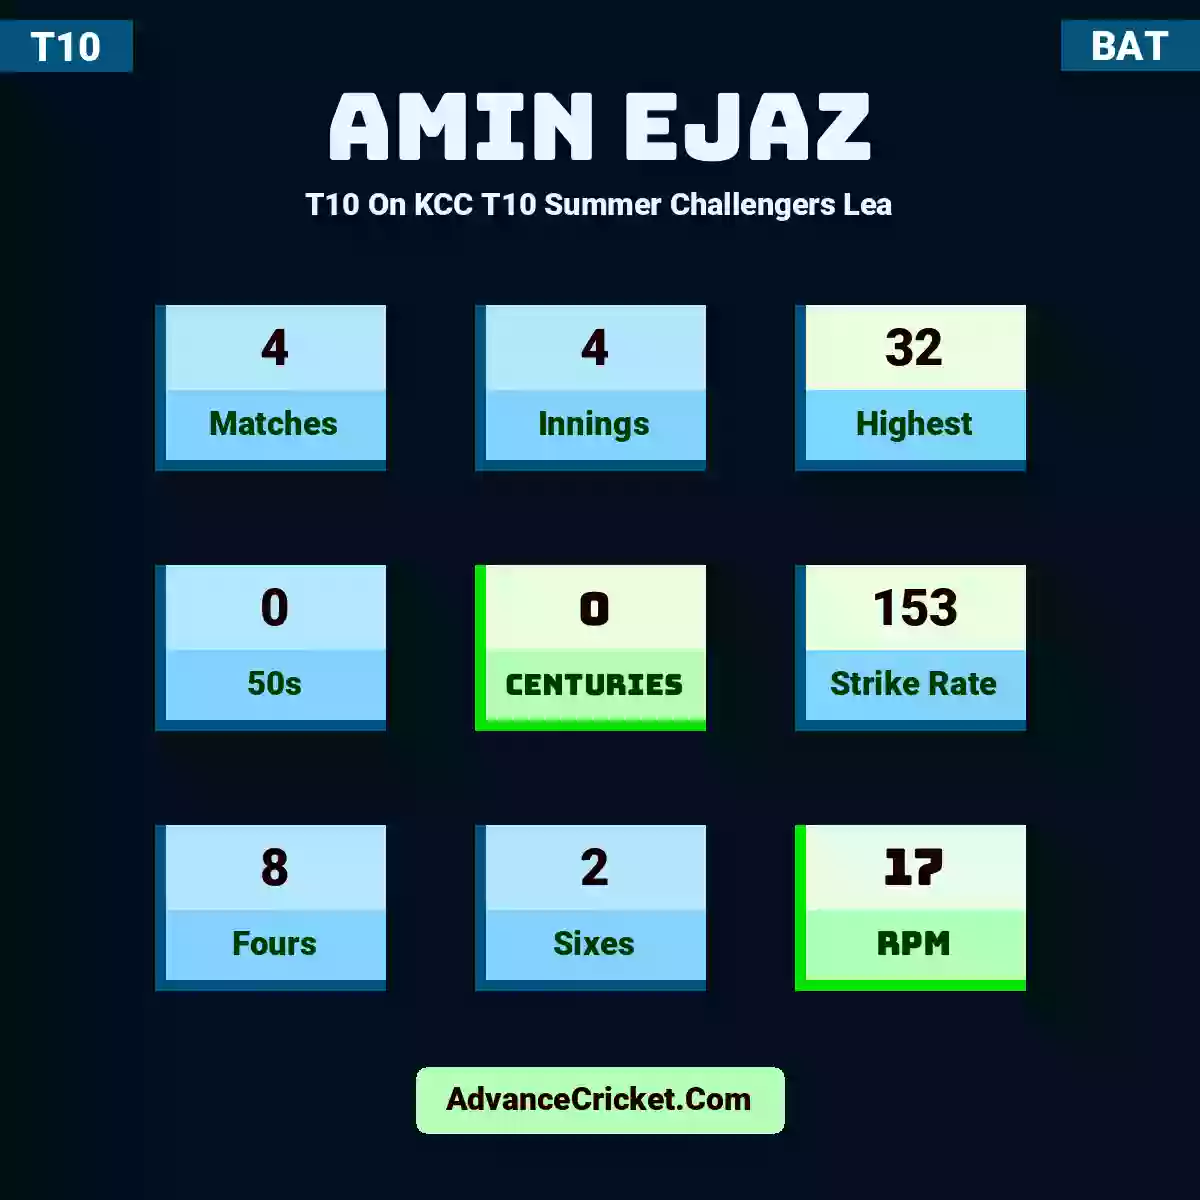 Amin Ejaz T10  On KCC T10 Summer Challengers Lea, Amin Ejaz played 4 matches, scored 32 runs as highest, 0 half-centuries, and 0 centuries, with a strike rate of 153. A.Ejaz hit 8 fours and 2 sixes, with an RPM of 17.